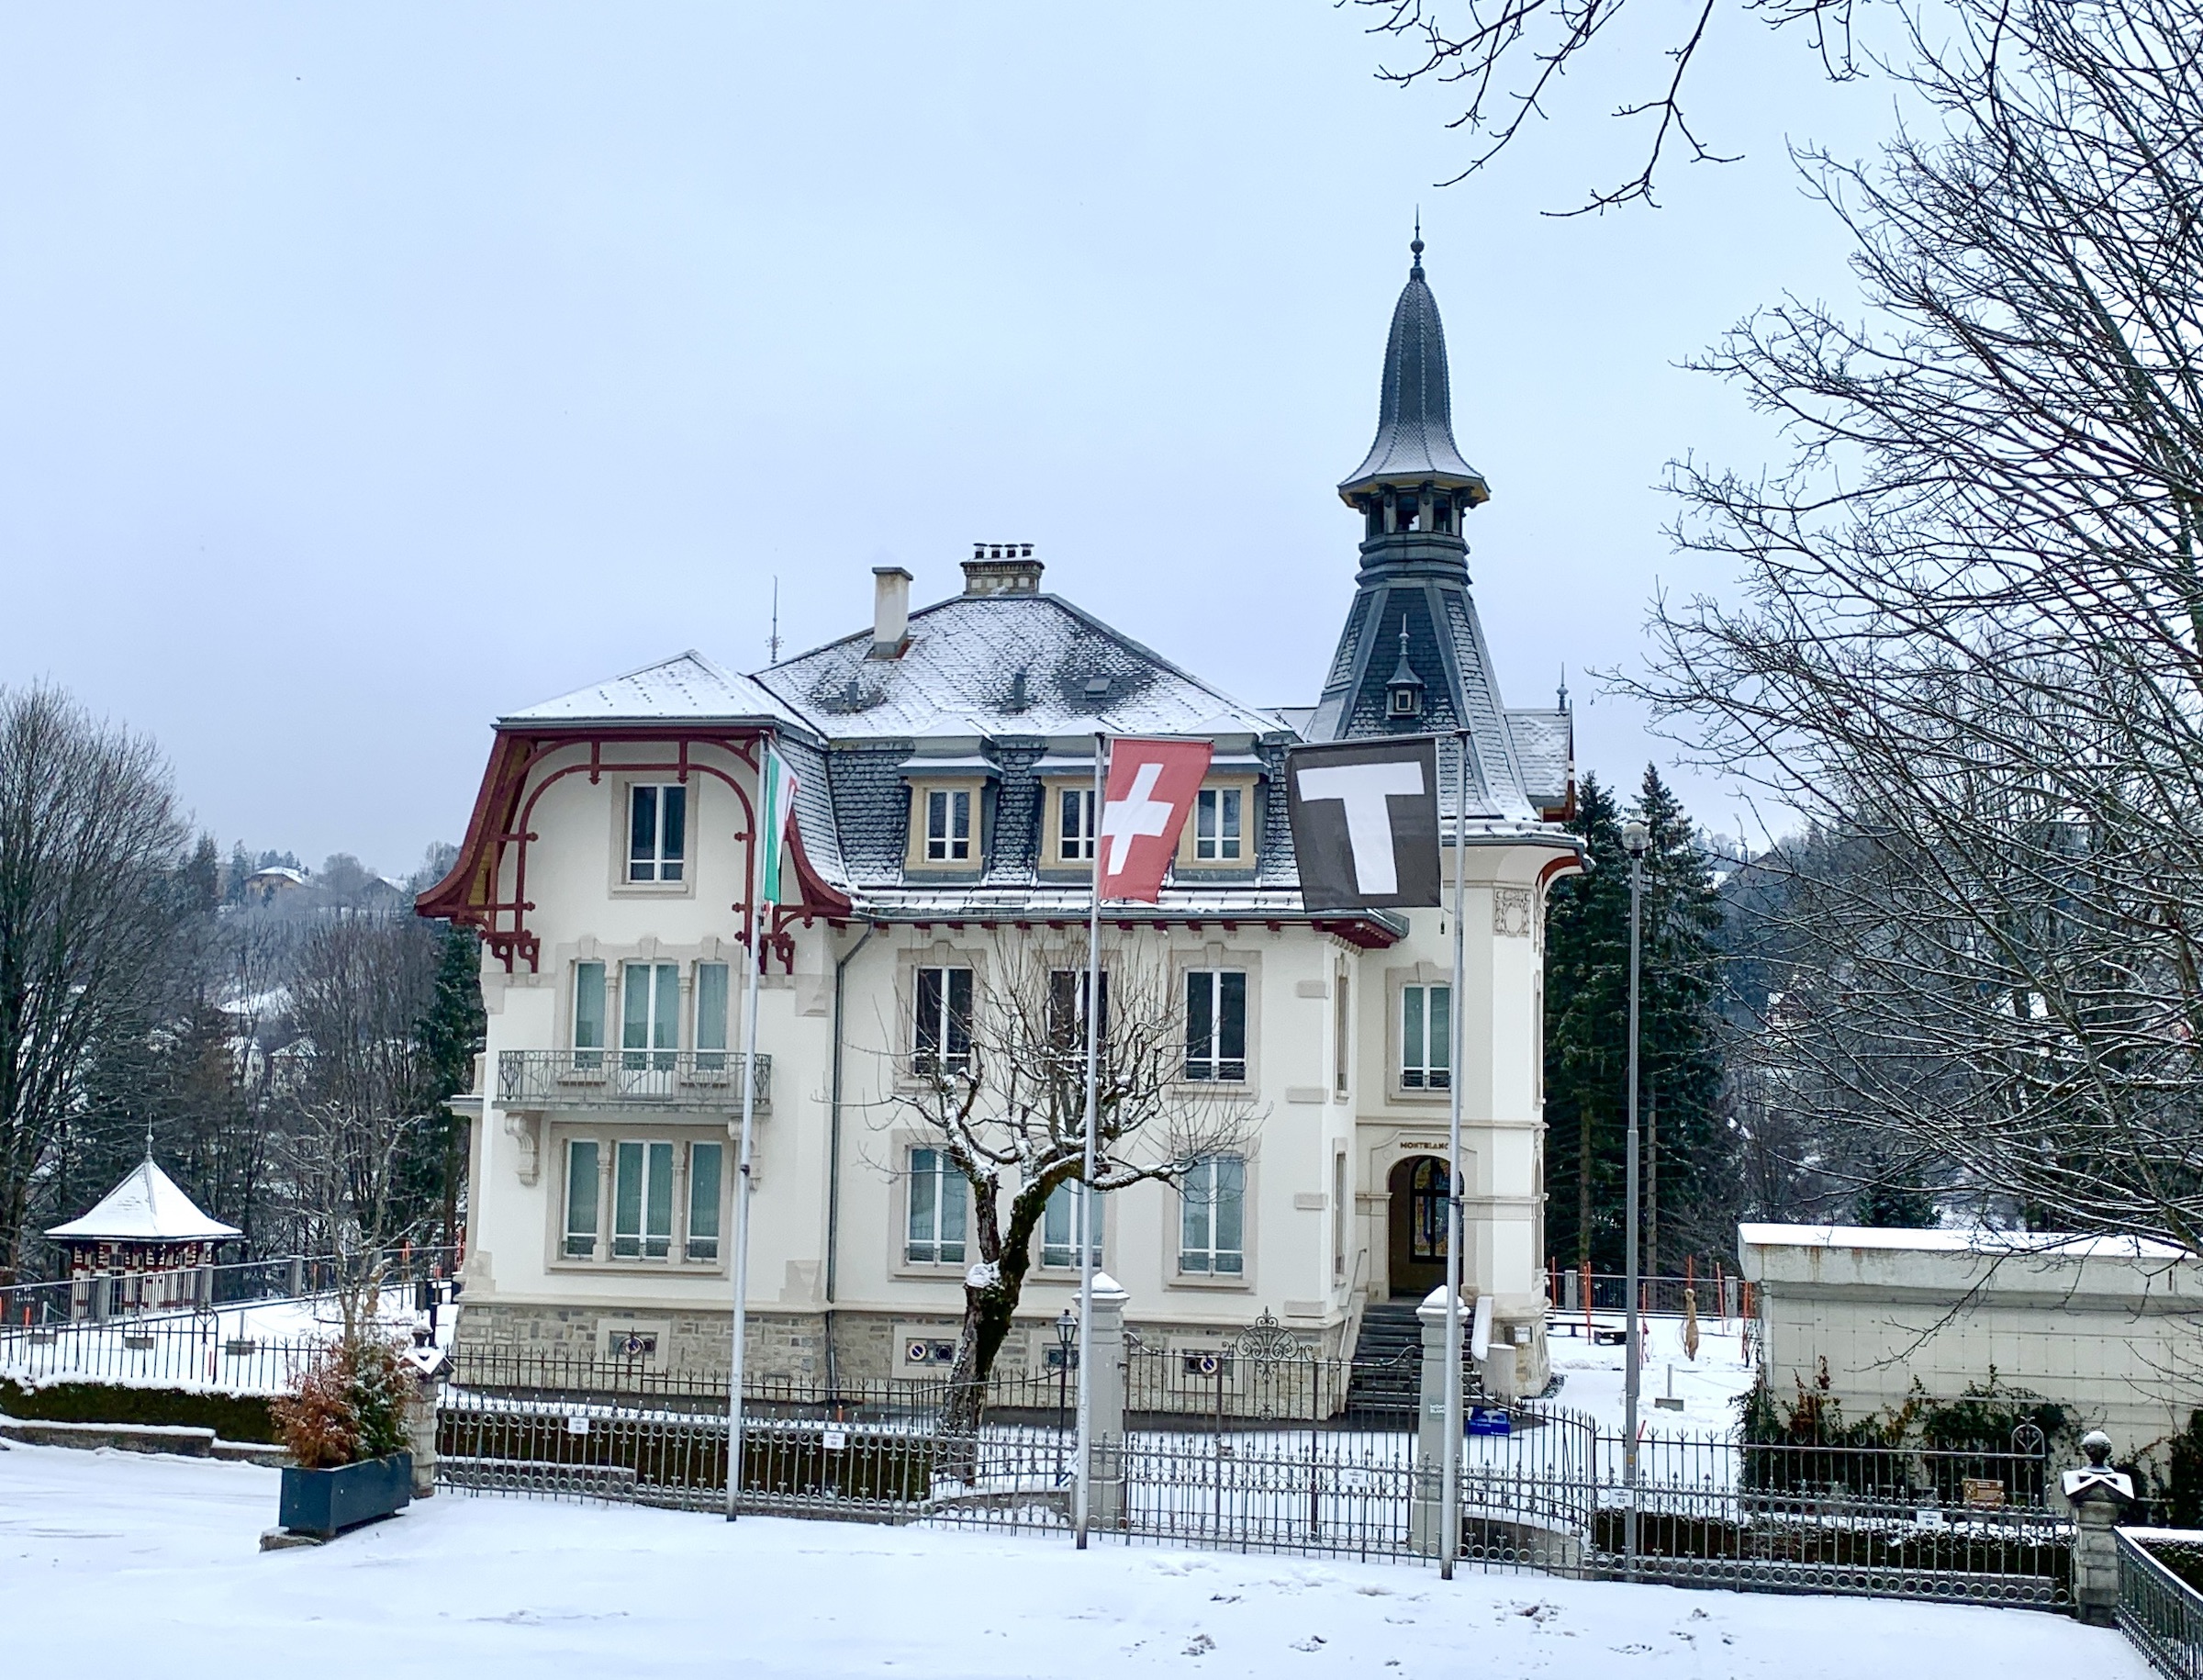 Building of the watch brand Tissot in Le Locle